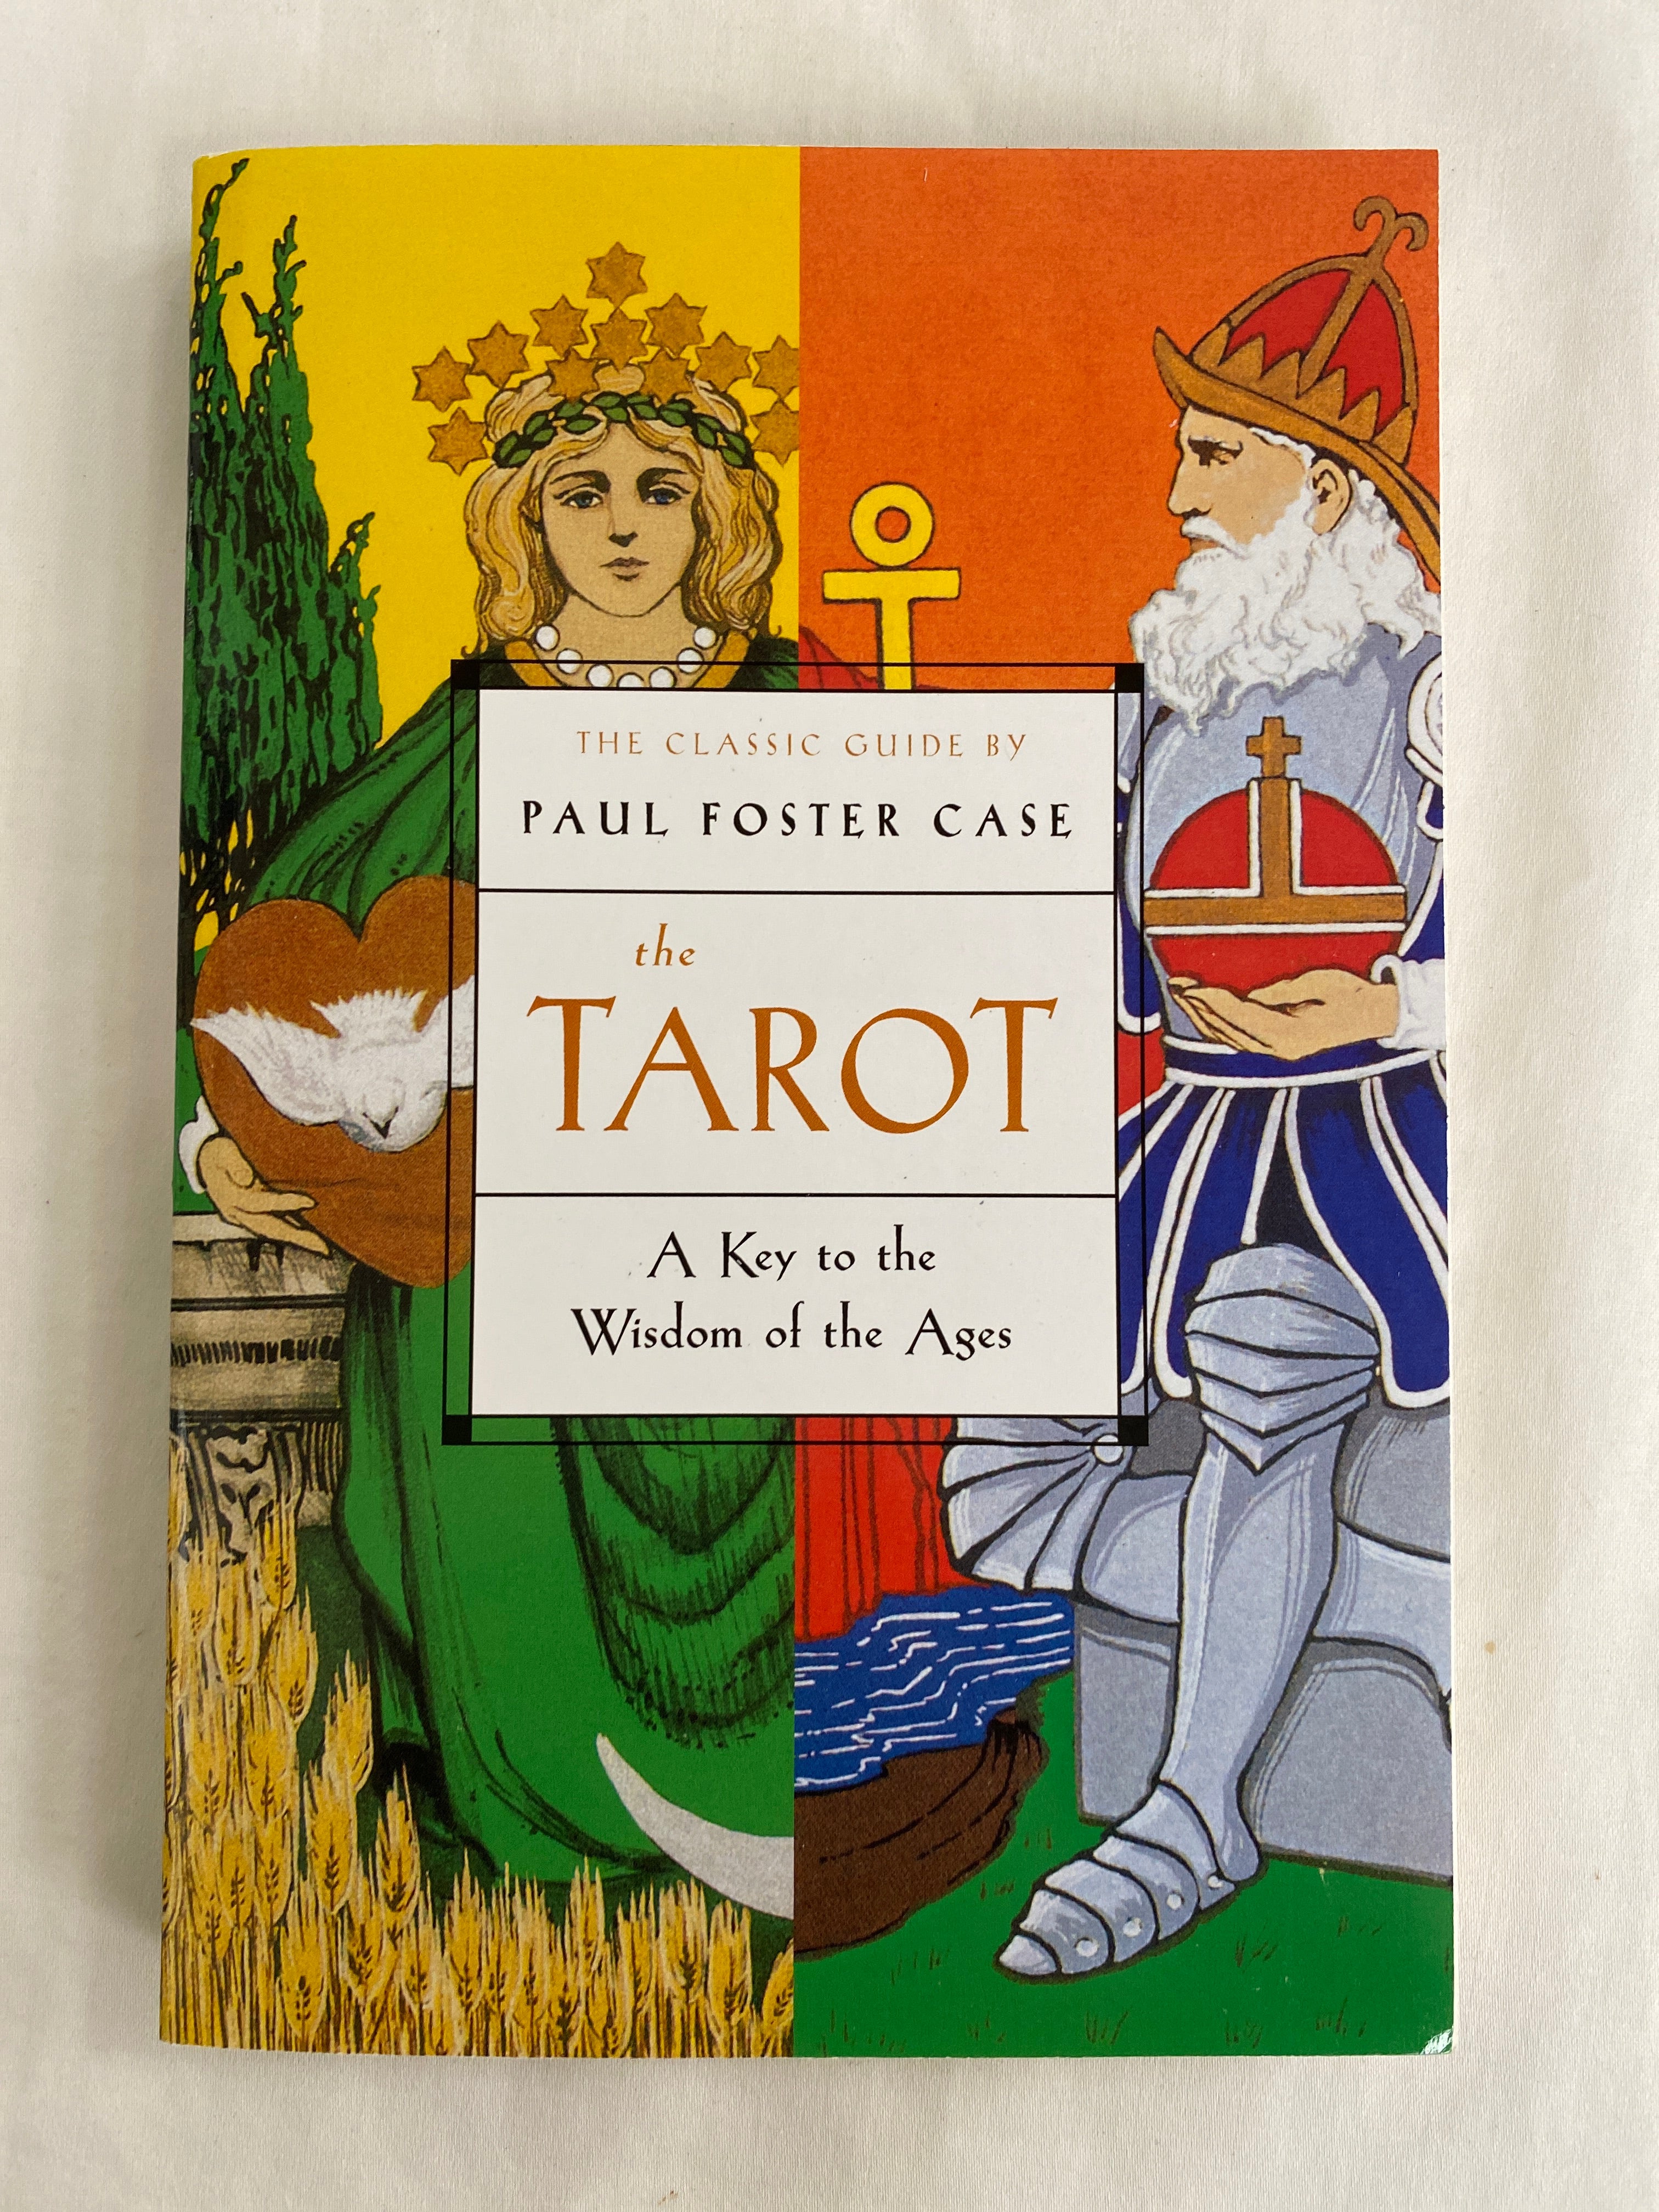 The Tarot - A Key to the Wisdom of the Ages